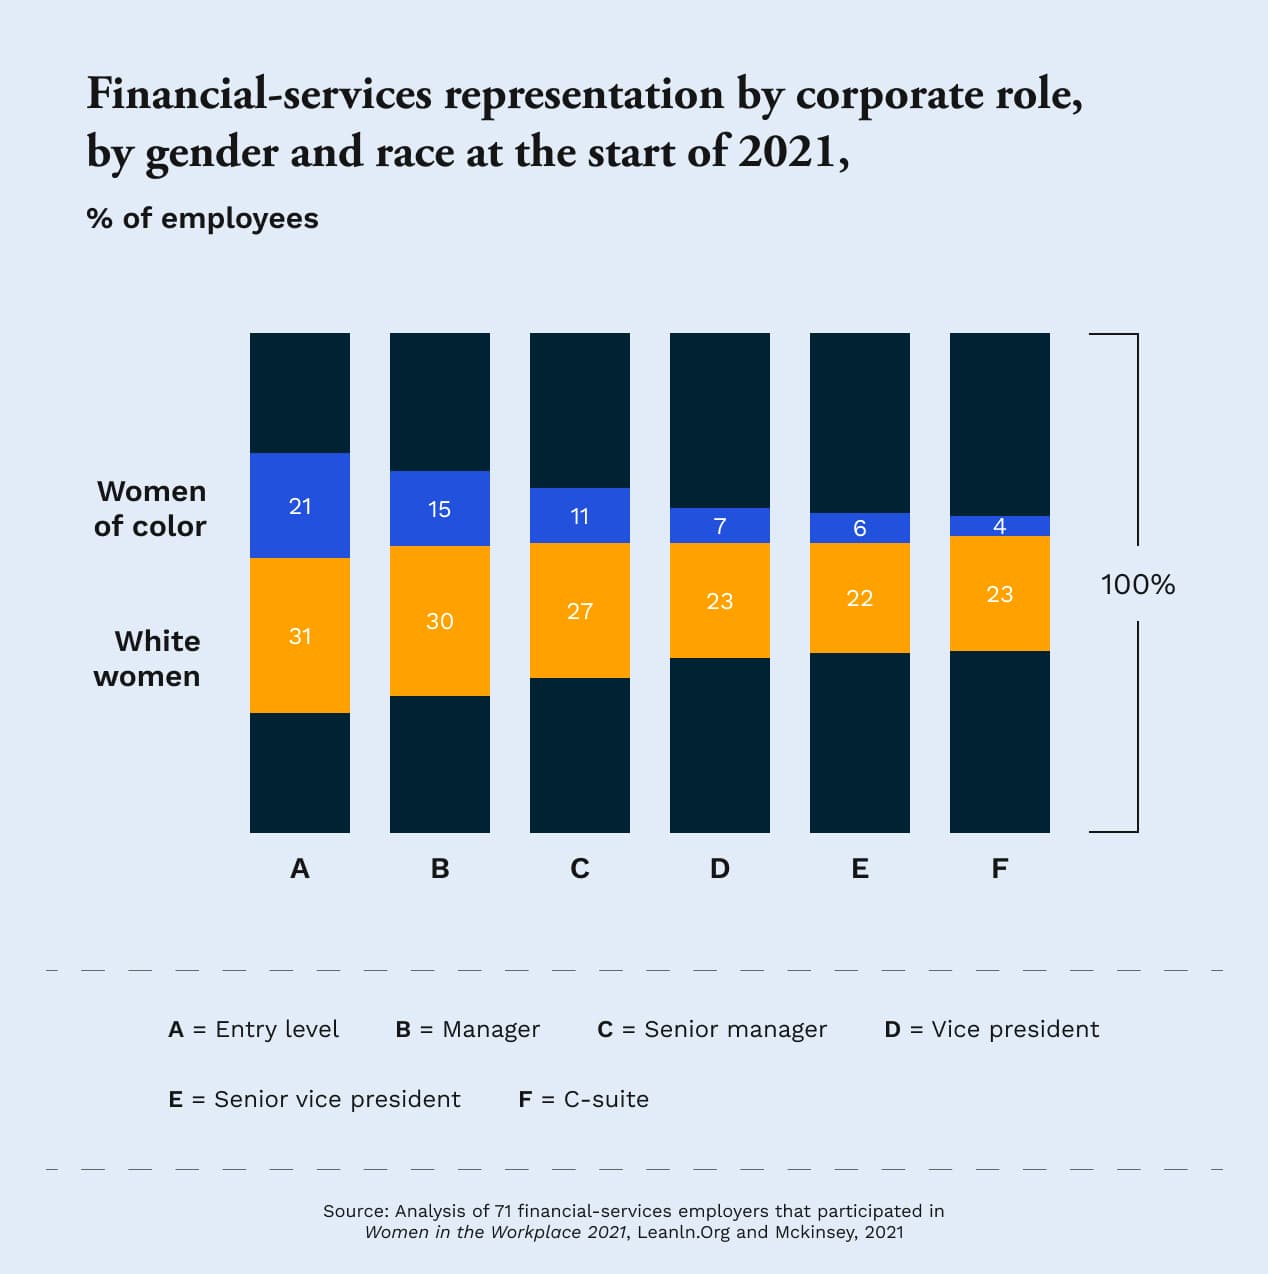 Bar chart showing financial services representation by corporate role, by race and gender in 2021